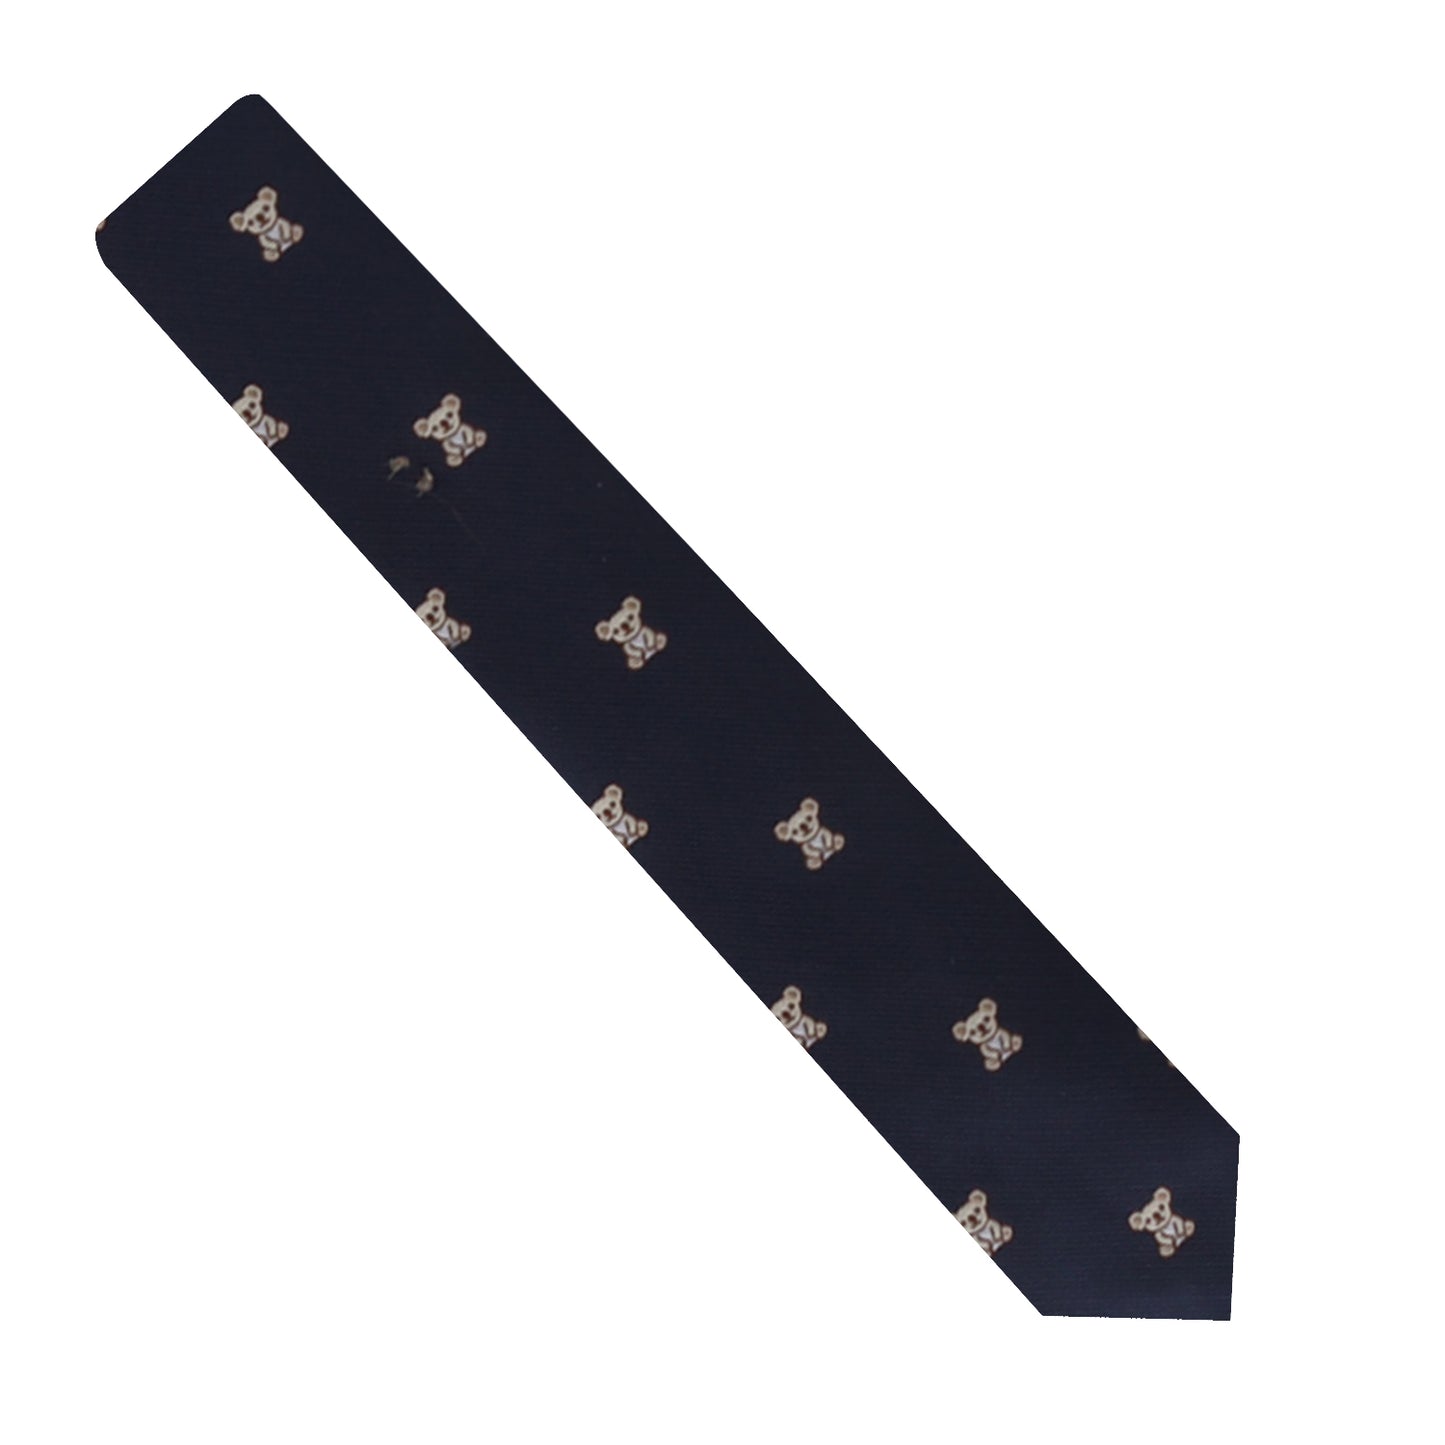 A navy blue Koala Skinny Tie with a pattern of small, symmetrical bee-like designs evenly spaced throughout adds an extra layer of charm.